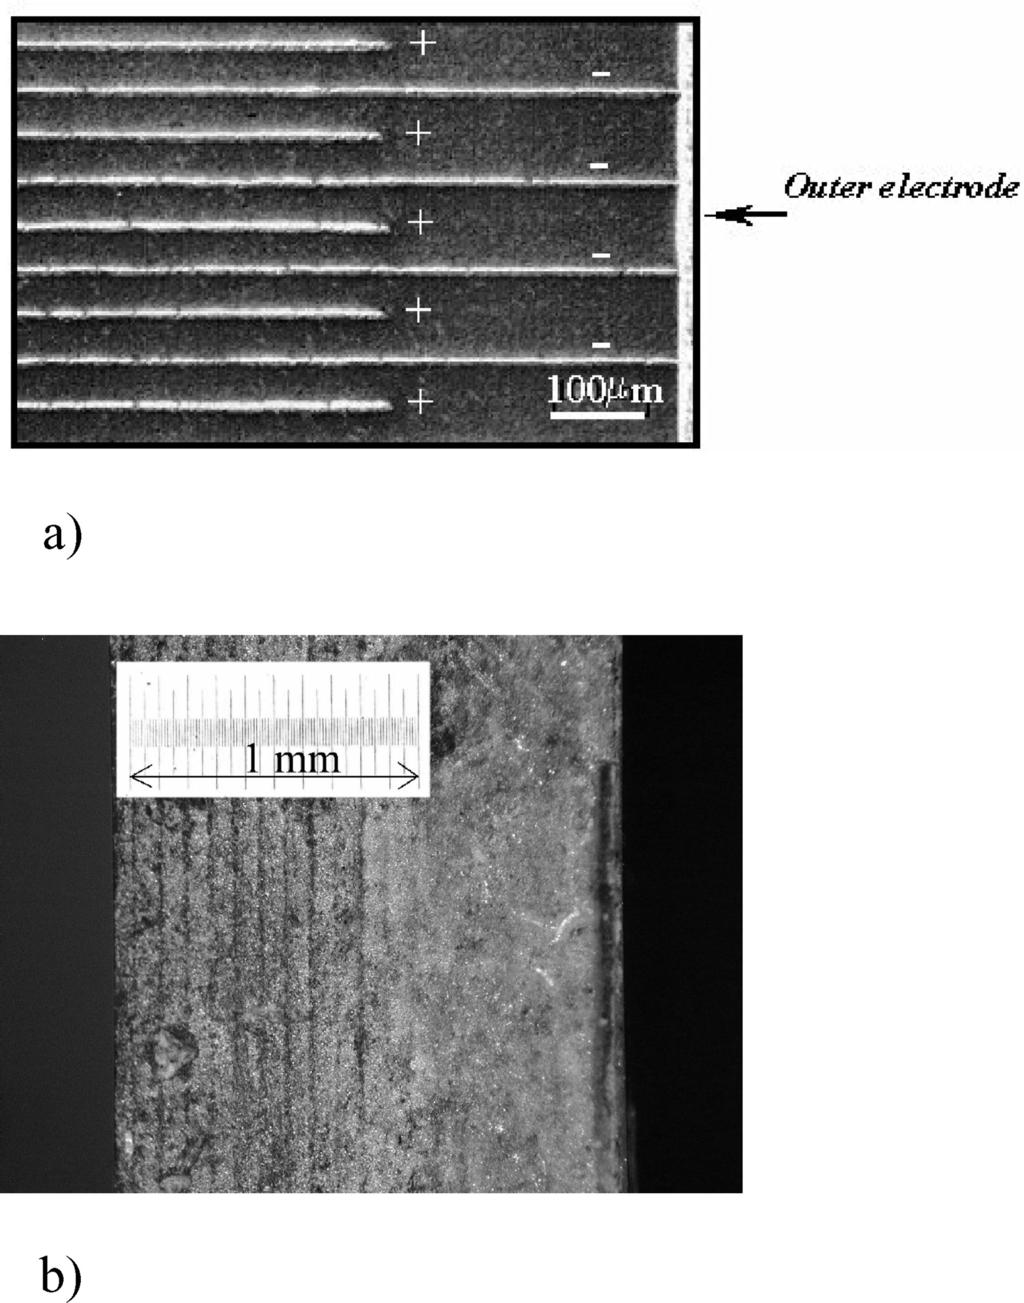 Laser Interferometric Displacement Measurements [633]/165 Figure 2. a) Electrode geometry of a typical multi-layer actuator with an ineffective volume at the device edges (typically 0.5 mm).